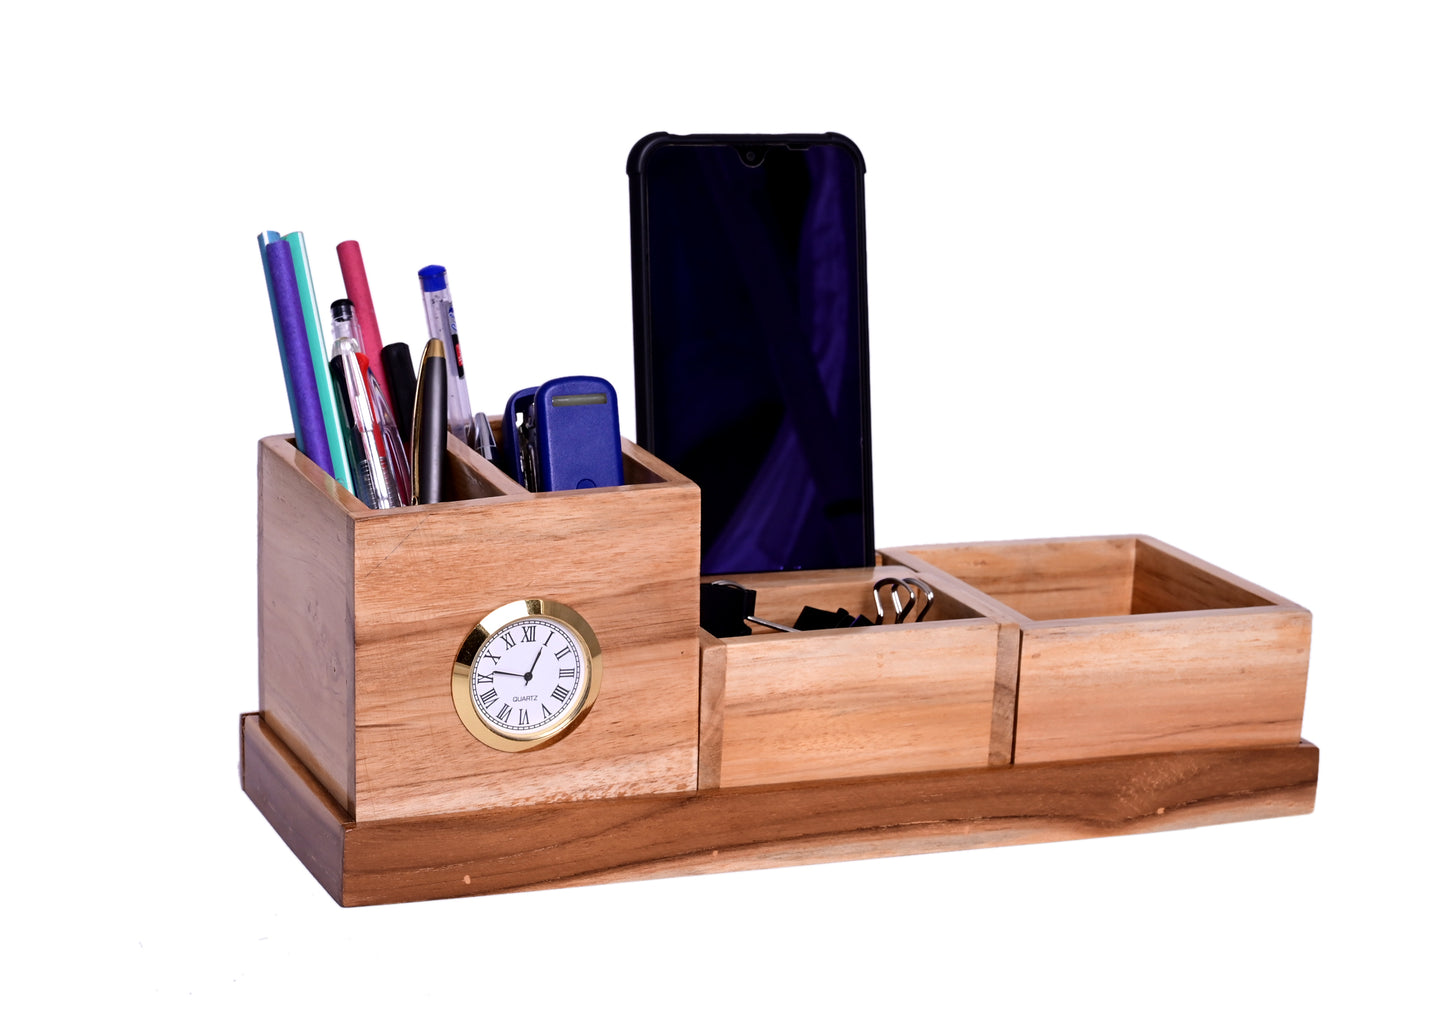 The Weaver's Nest Teak Wood Desk Organizer with Pen Stand, Clock, Mobile Phone Holder for Home and Office